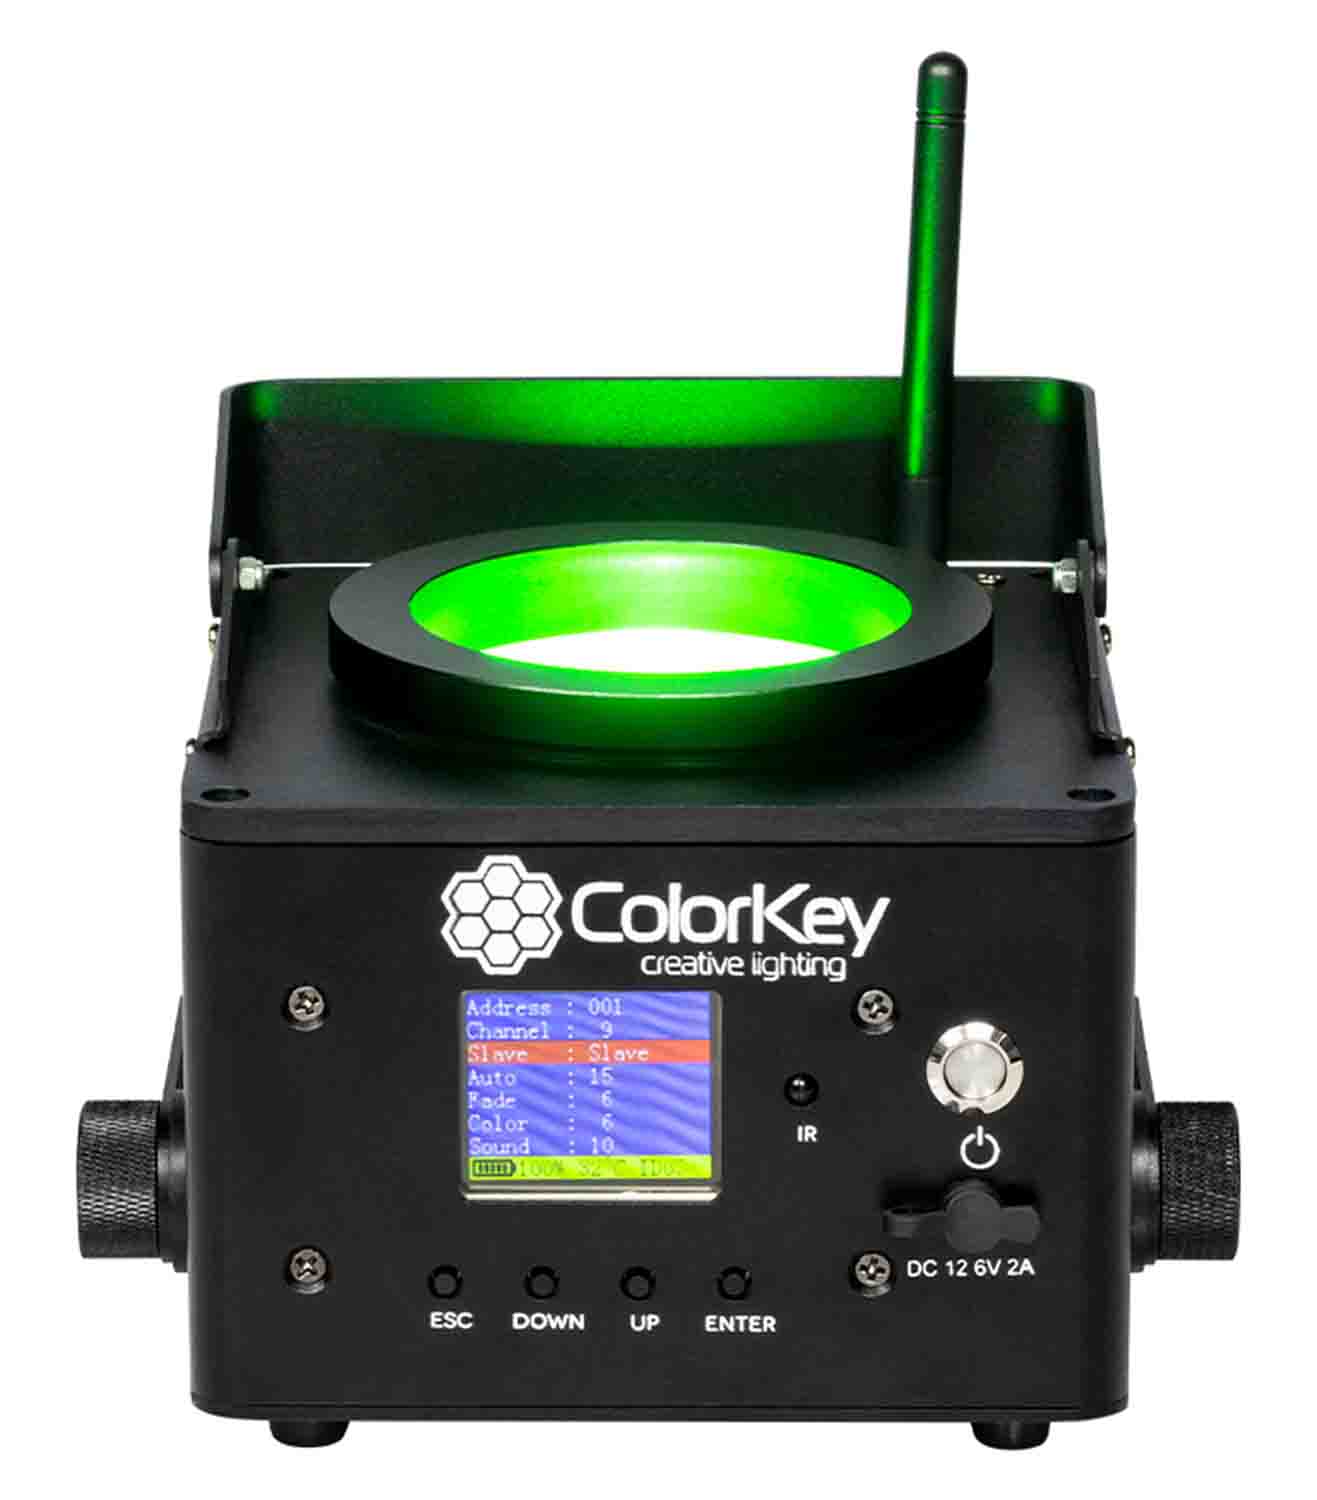 Colorkey CKU-7050, 2 Pack of AirPar COB QUAD Wireless Battery Powered Chip-on-Board Wash Light - Hollywood DJ